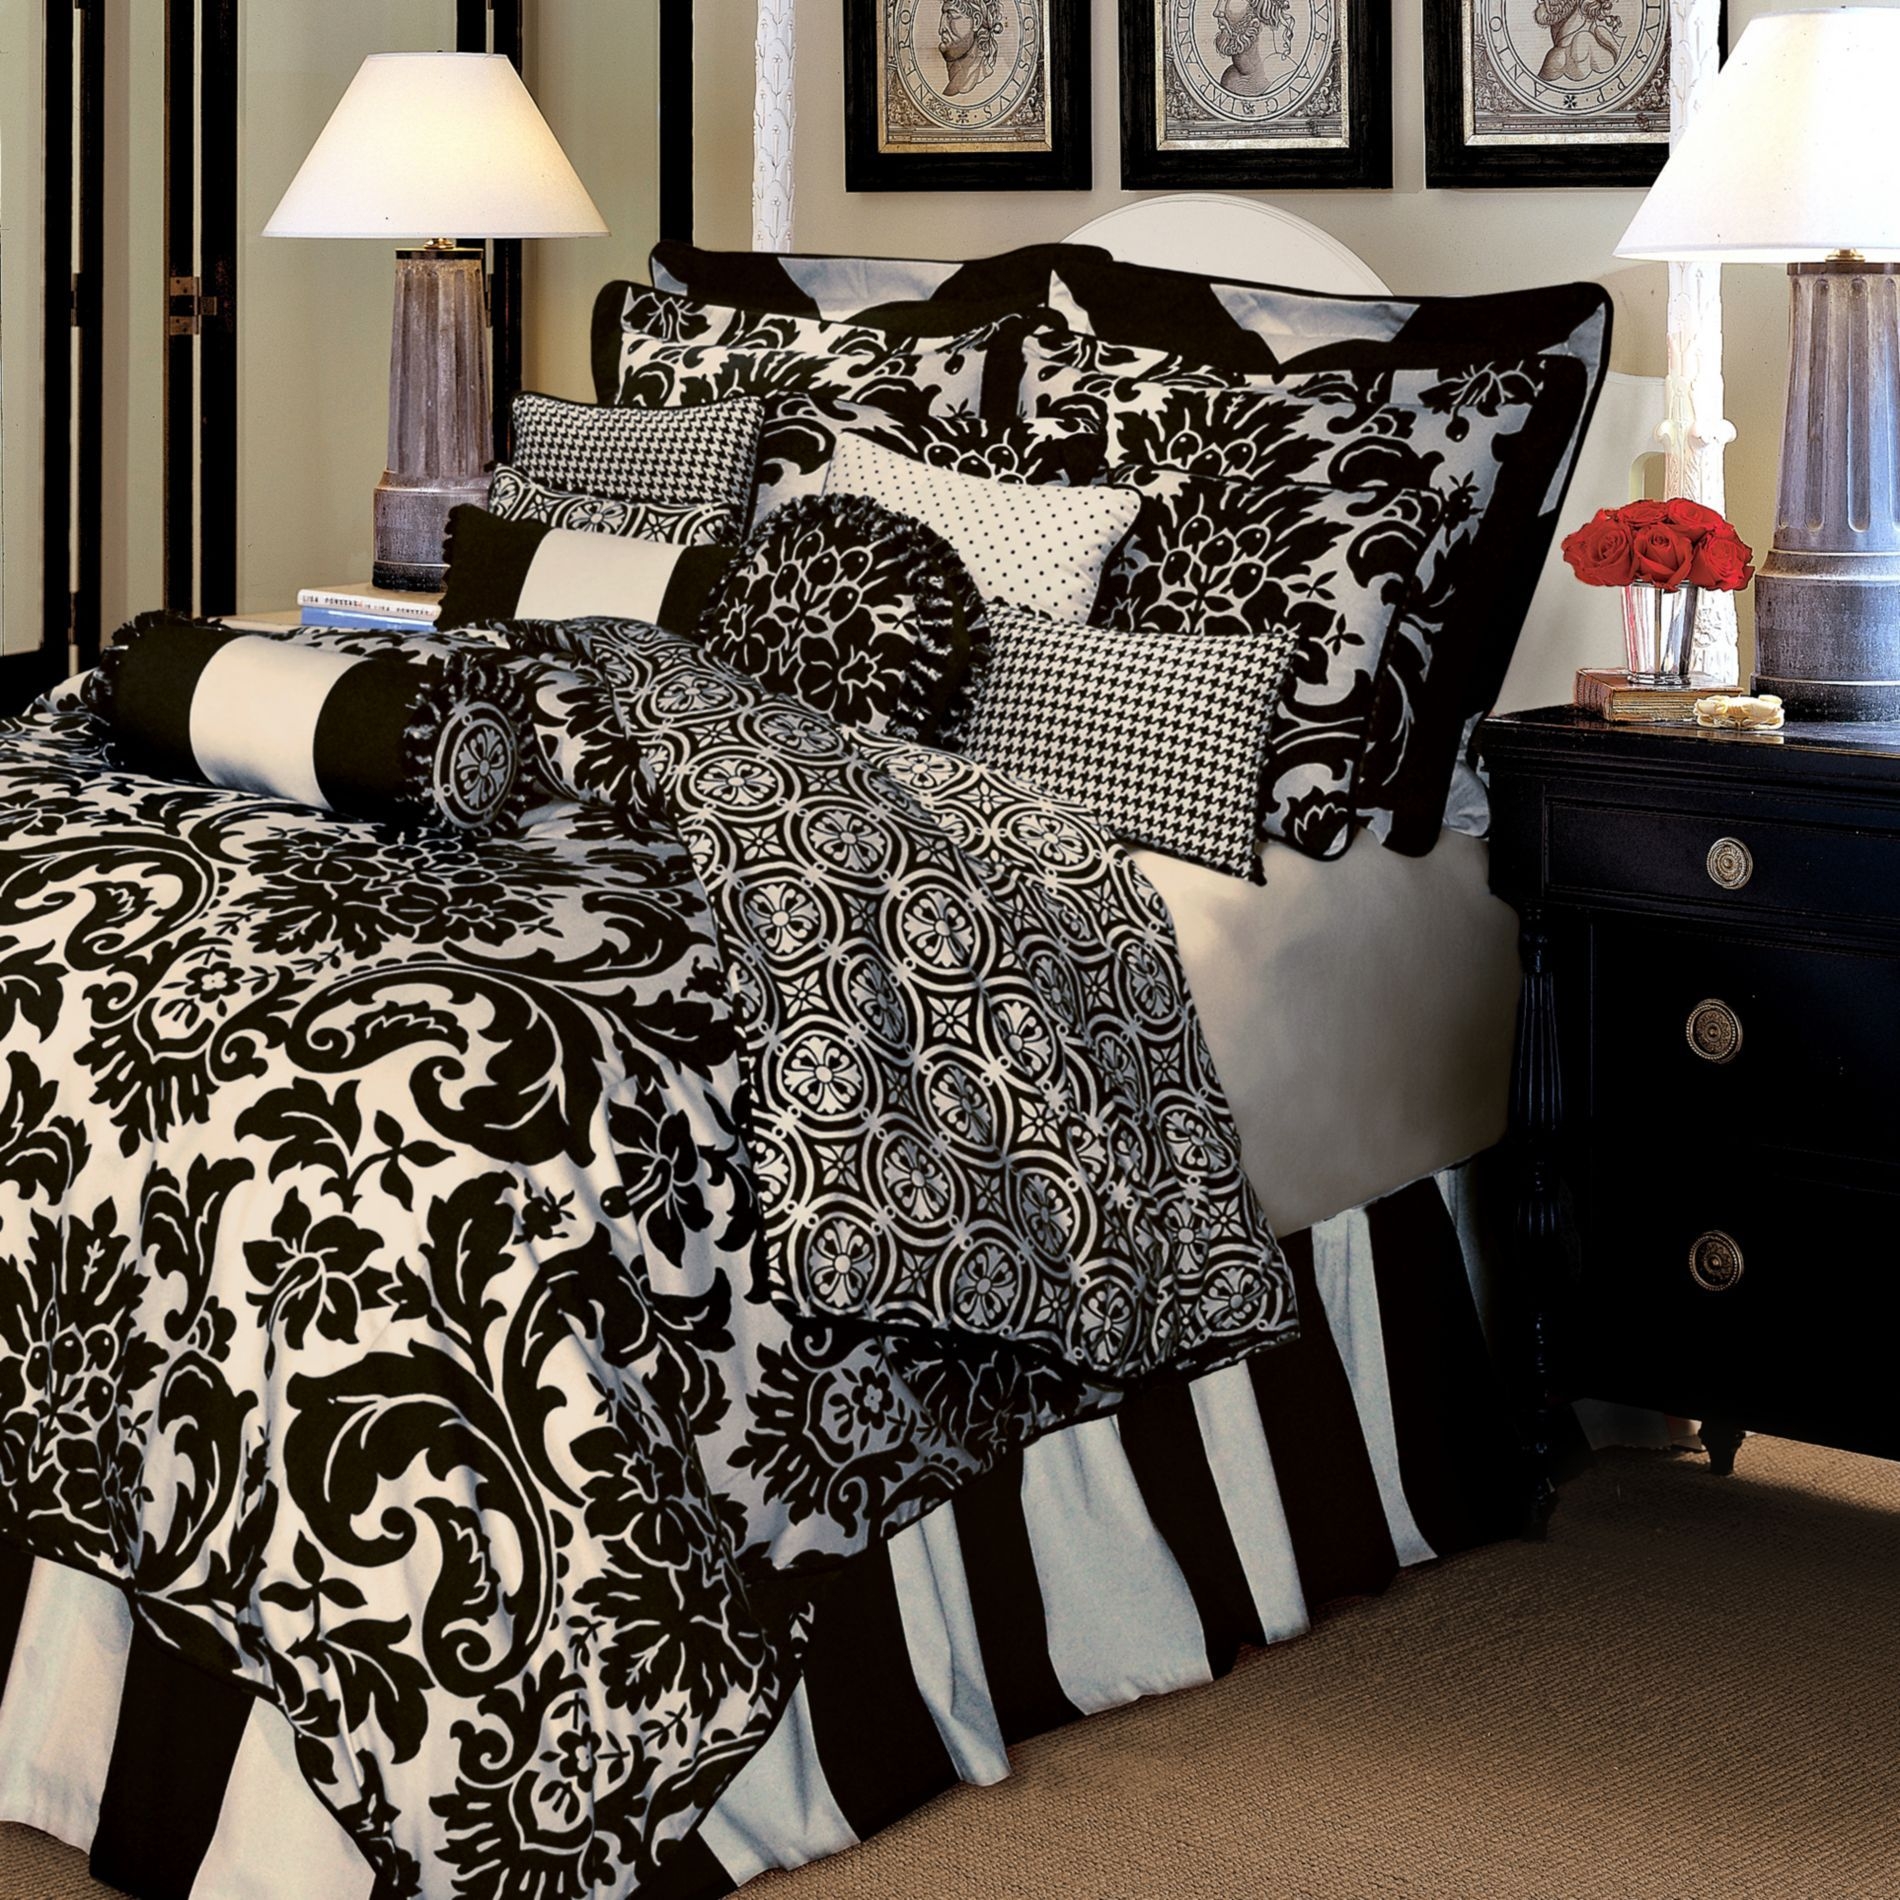 Black and white damask duvet cover queen